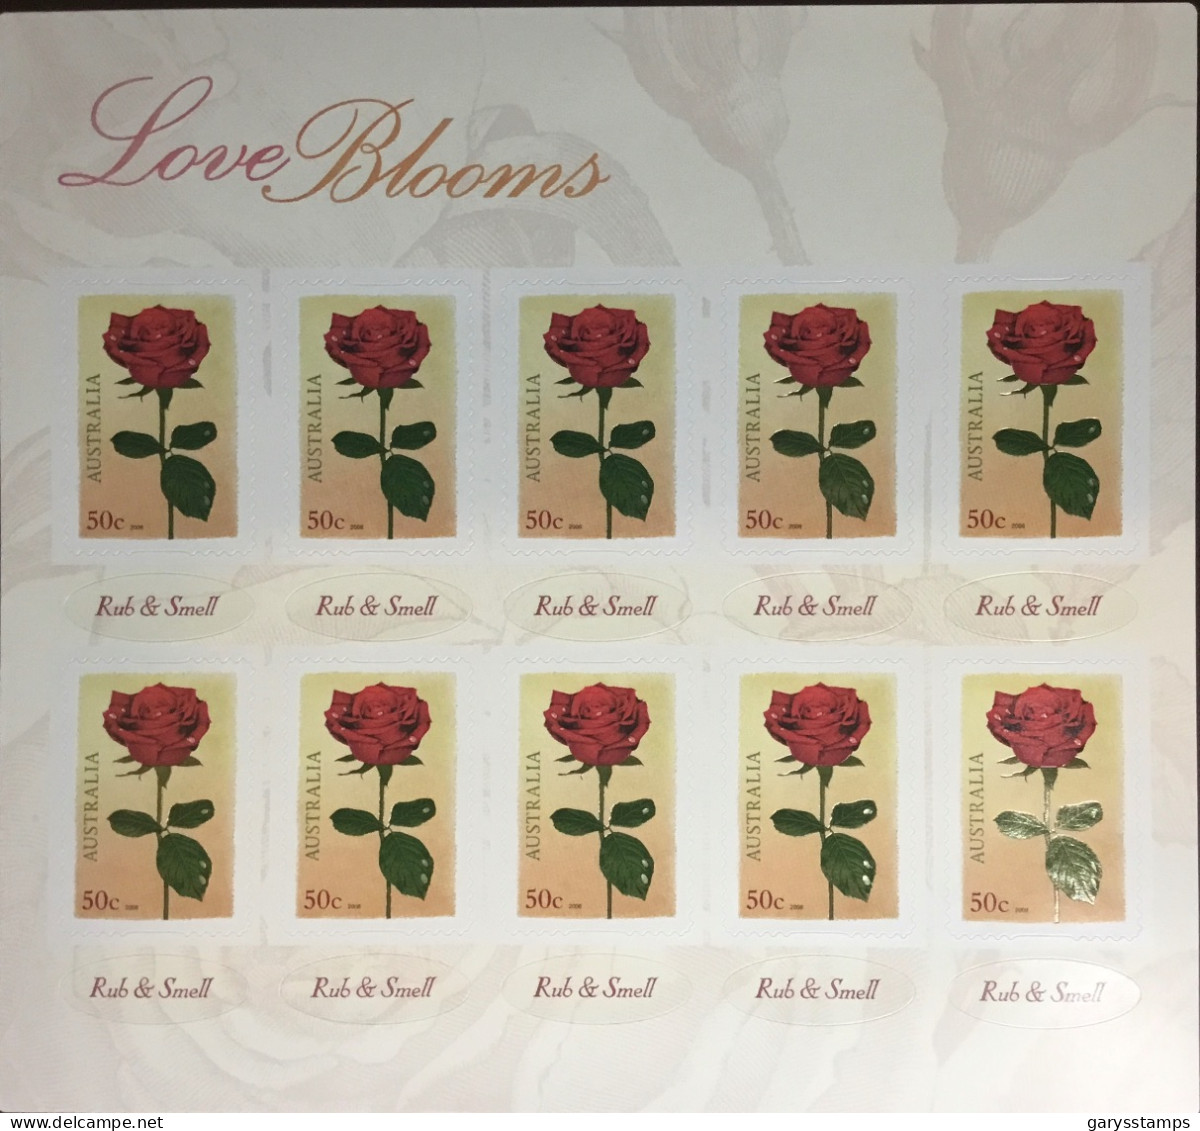 Australia 2008 Love Blooms Roses Flowers Scratch & Sniff Sheetlet MNH - Roses